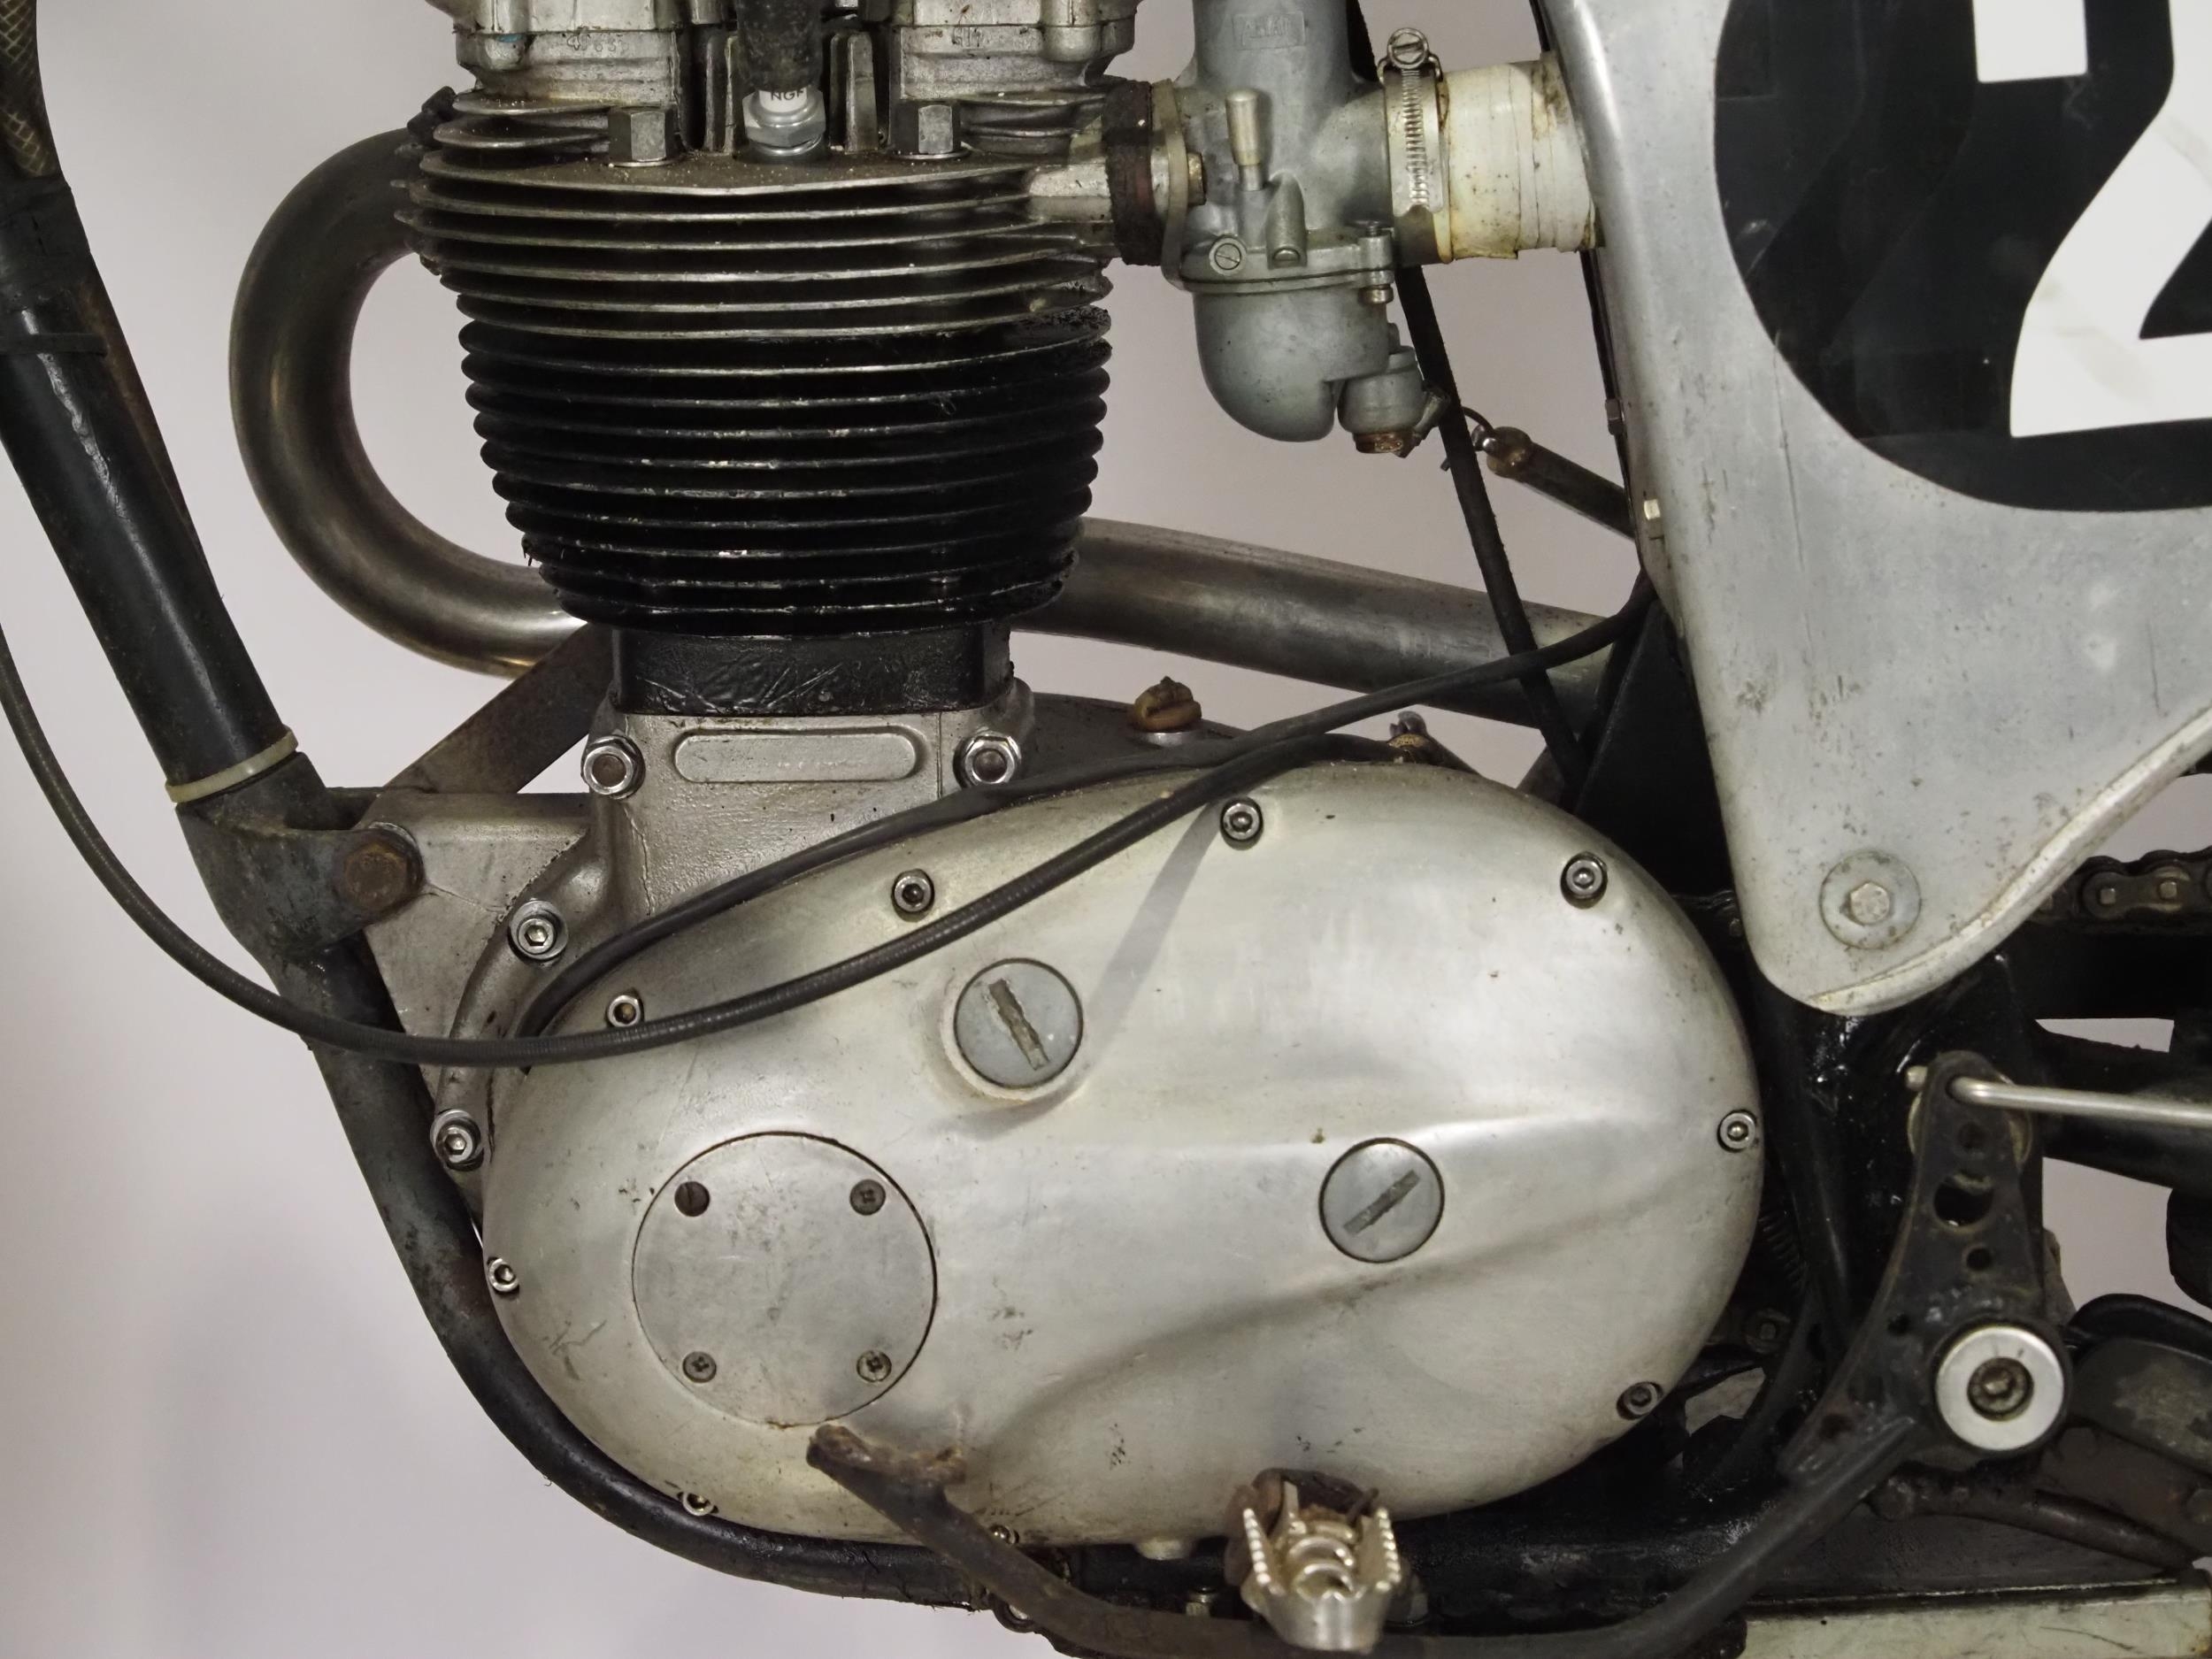 BSA Walker Victor trials motorcycle. 441cc Engine turns over. Has been dry stored for many years. - Image 6 of 7